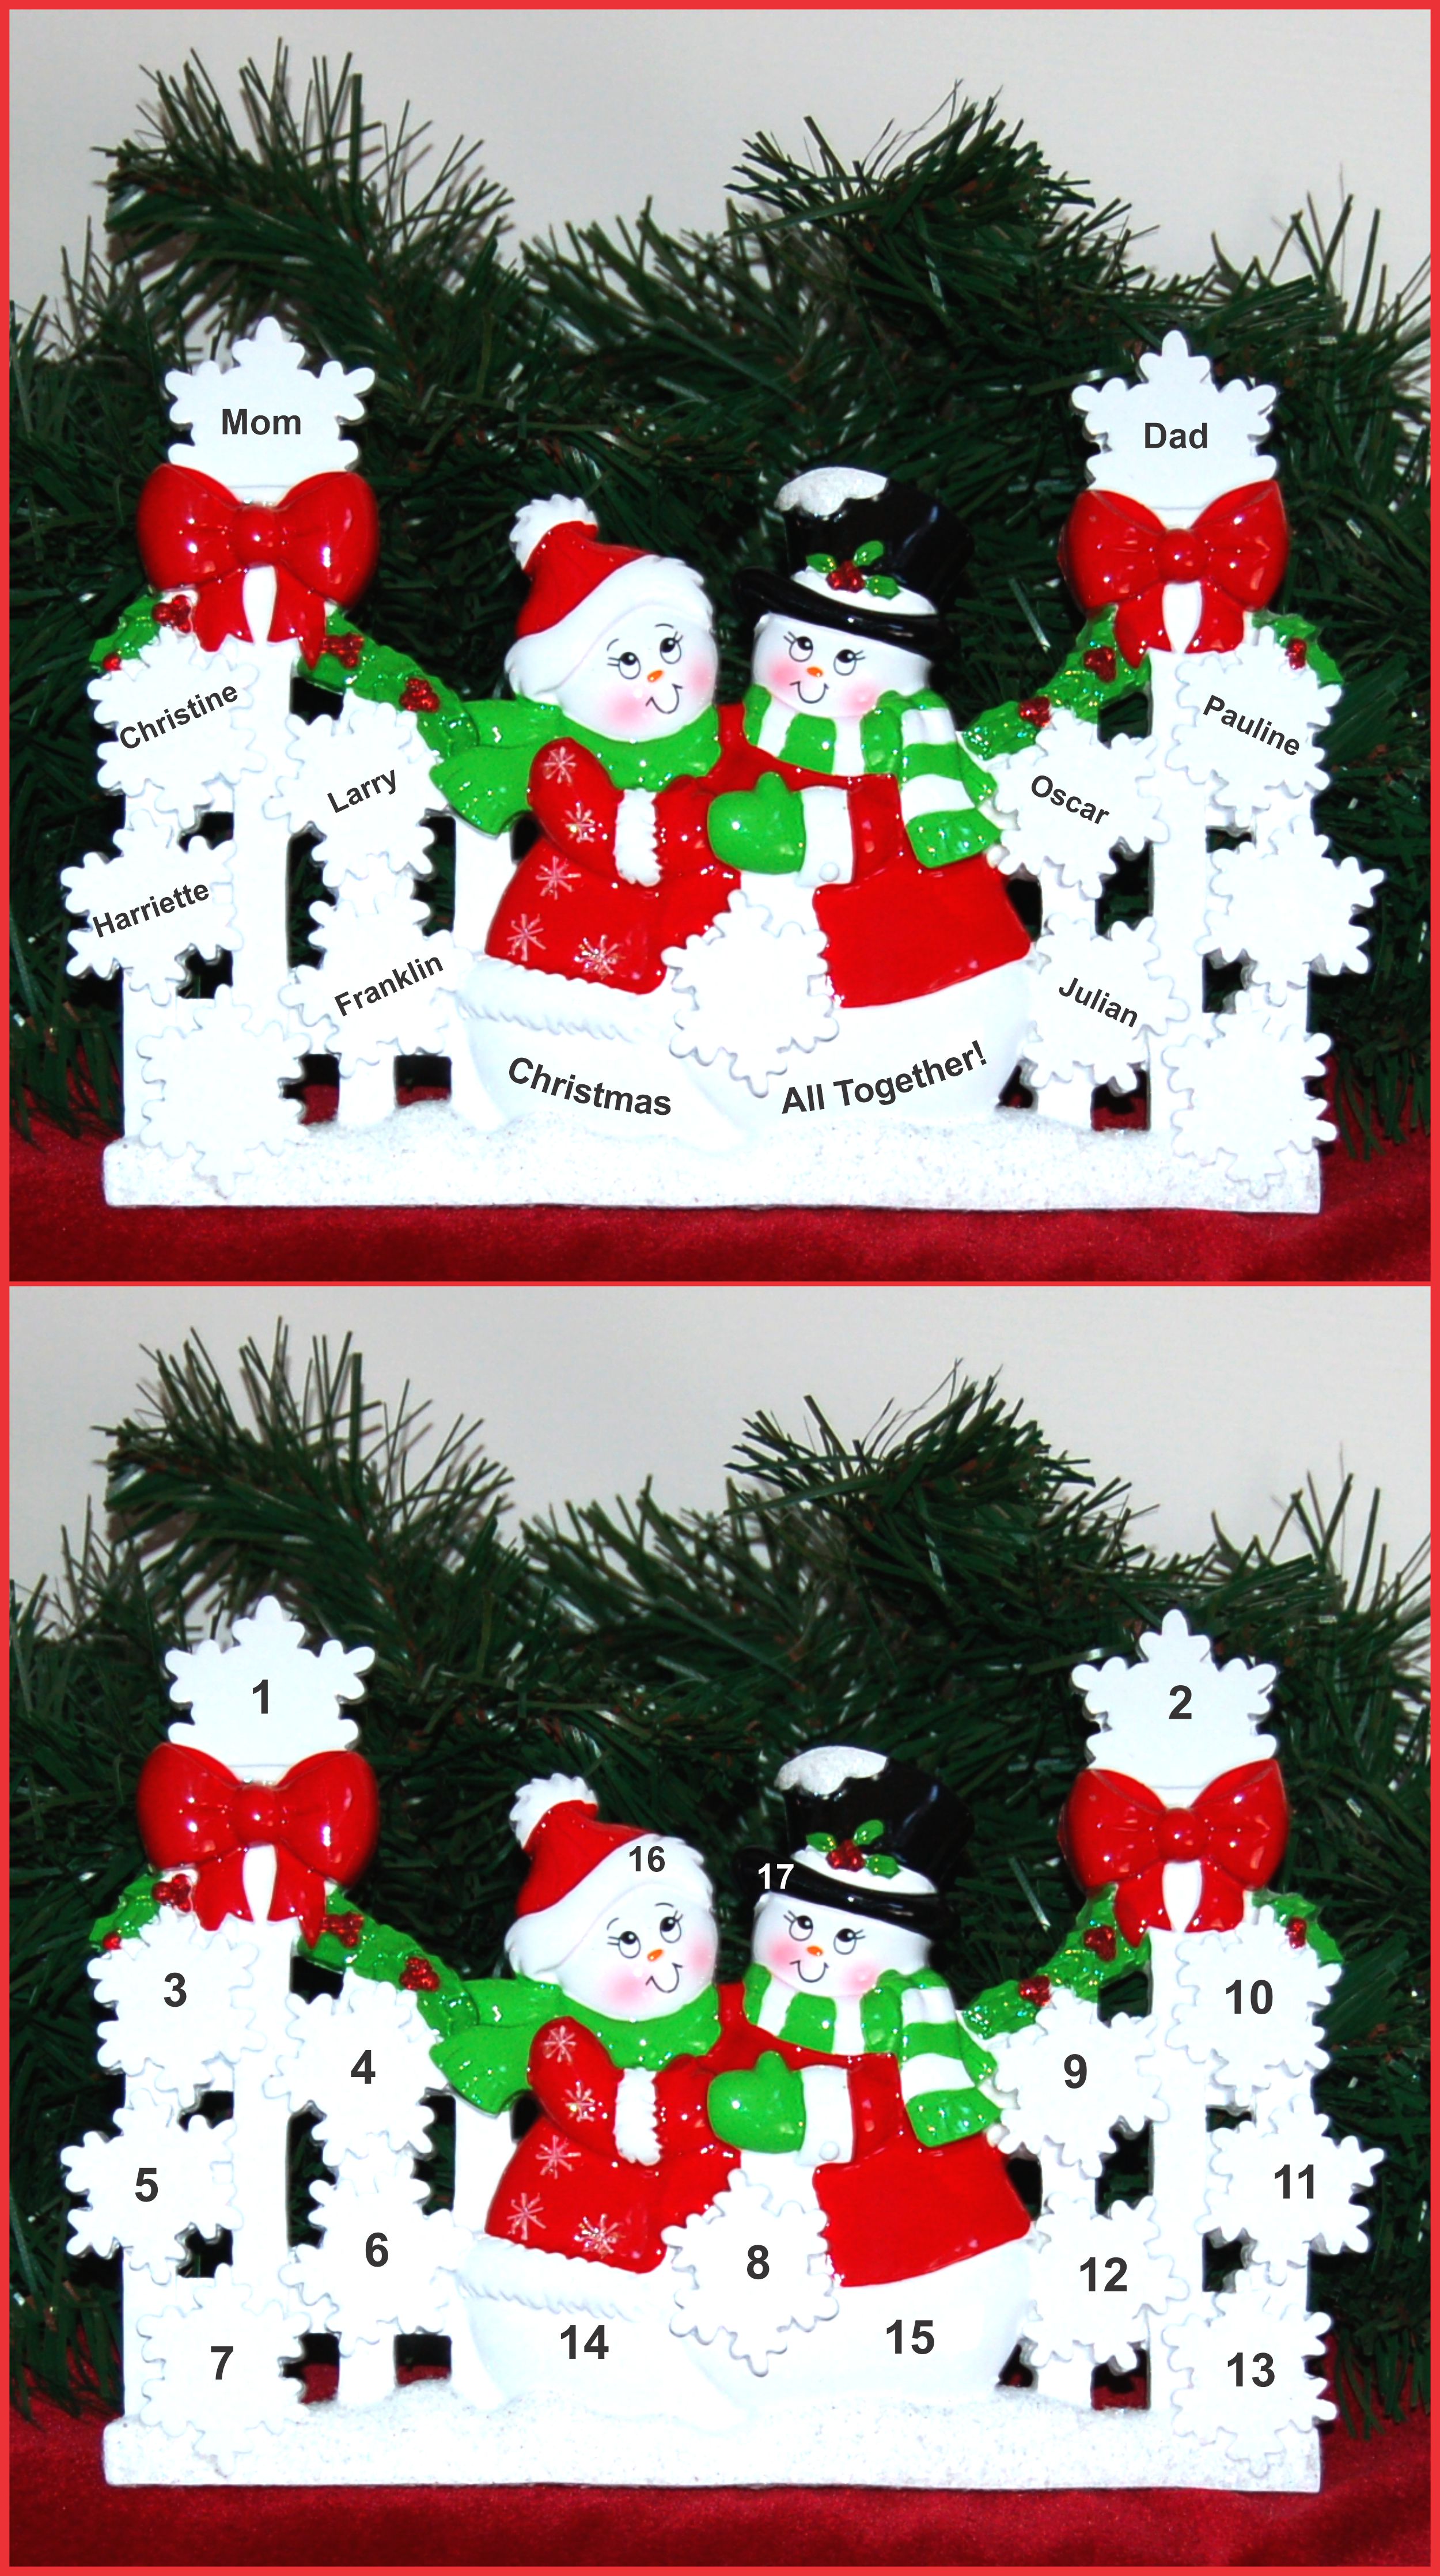 Tabletop Christmas Decoration Snowflakes Family of 9 Personalized by RussellRhodes.com